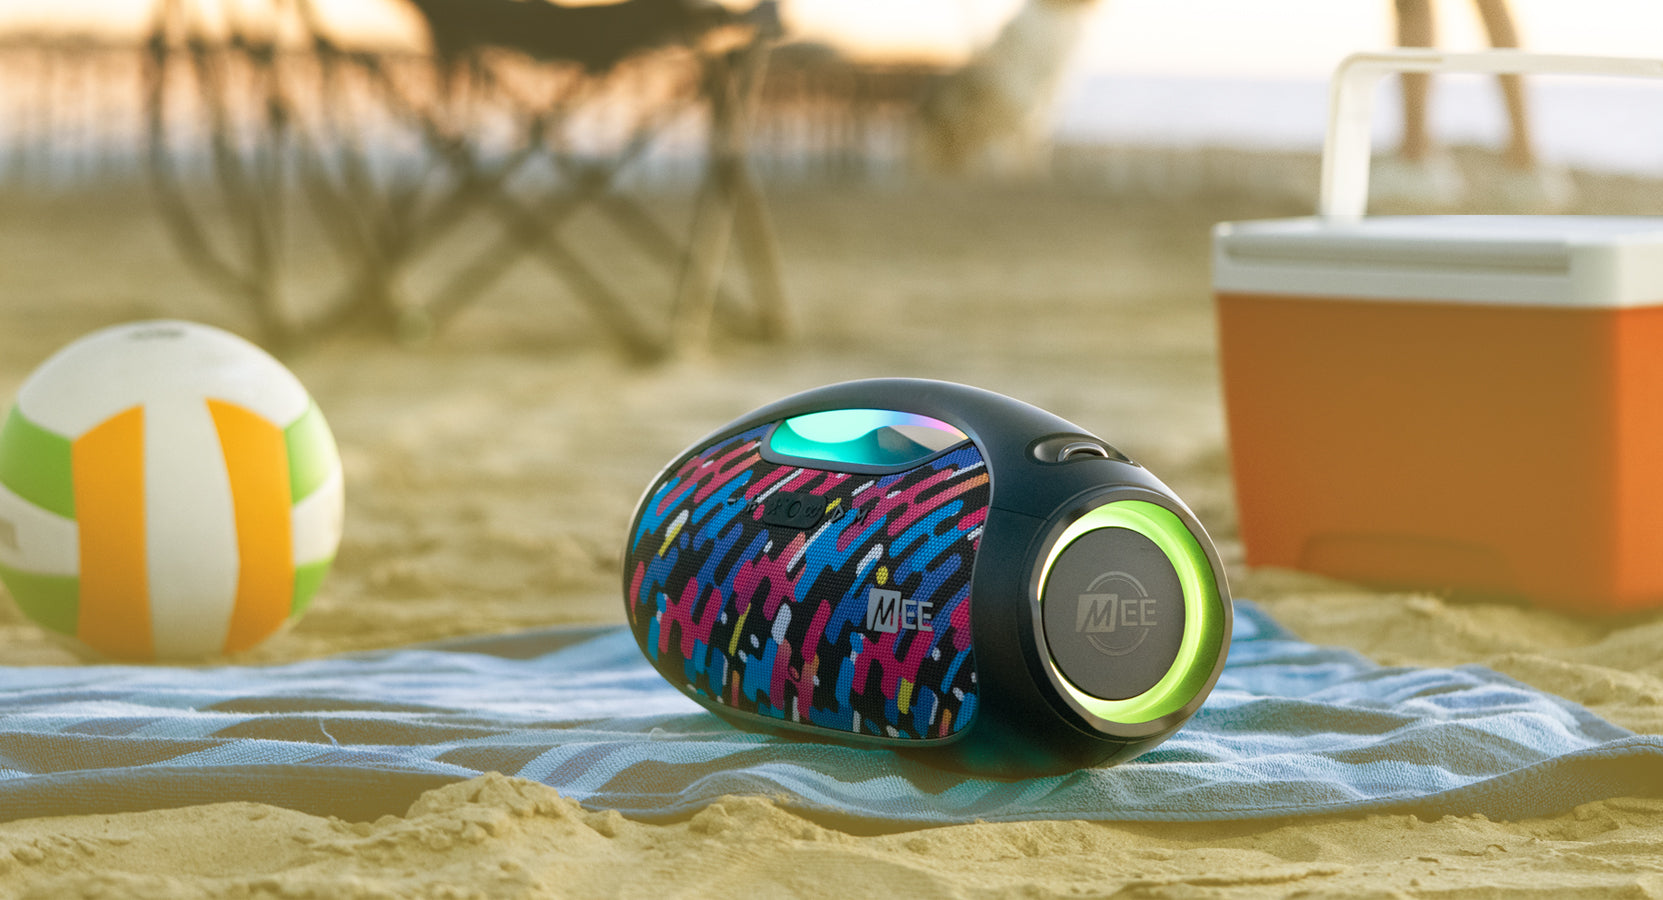 A colorful portable speaker on a sandy beach with a volleyball and a cooler in the background, capturing a relaxed beach day setting.